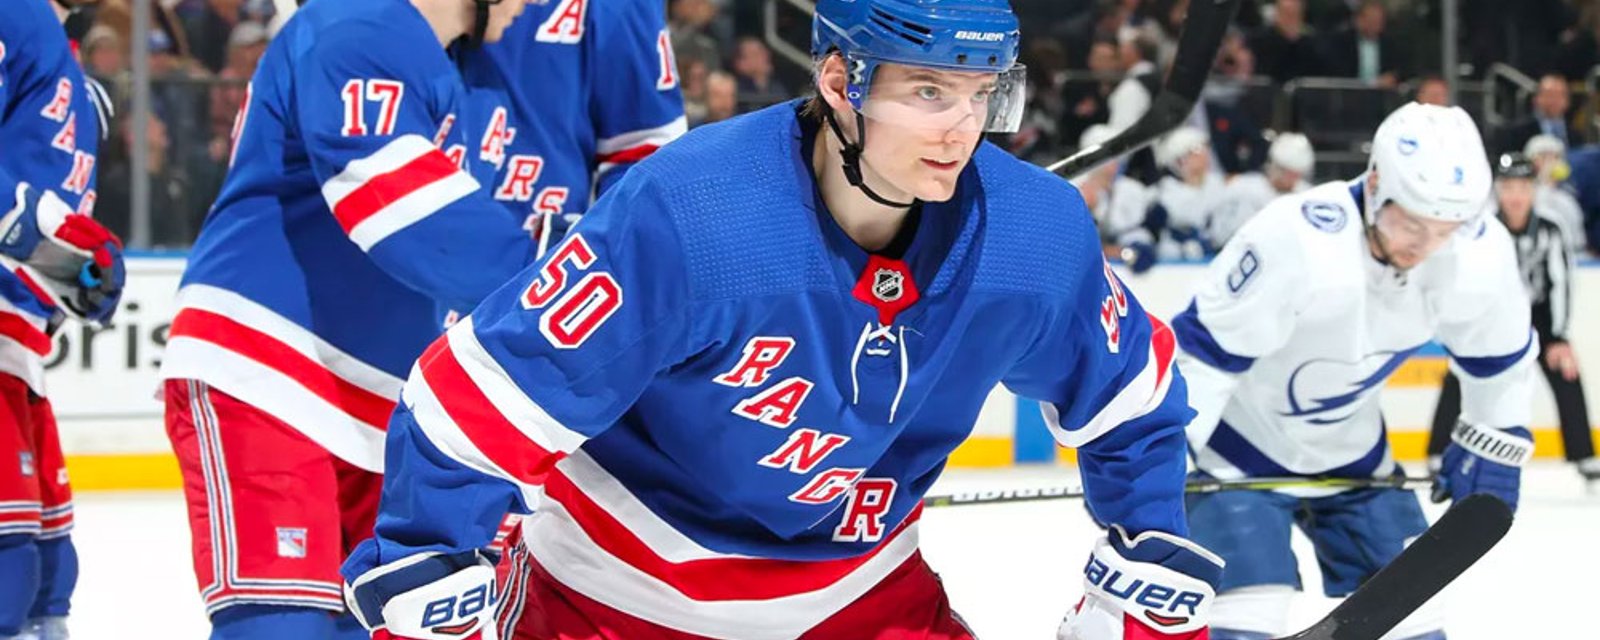 Suspended Rangers prospect Lias Andersson opens up about his reasons for leaving team